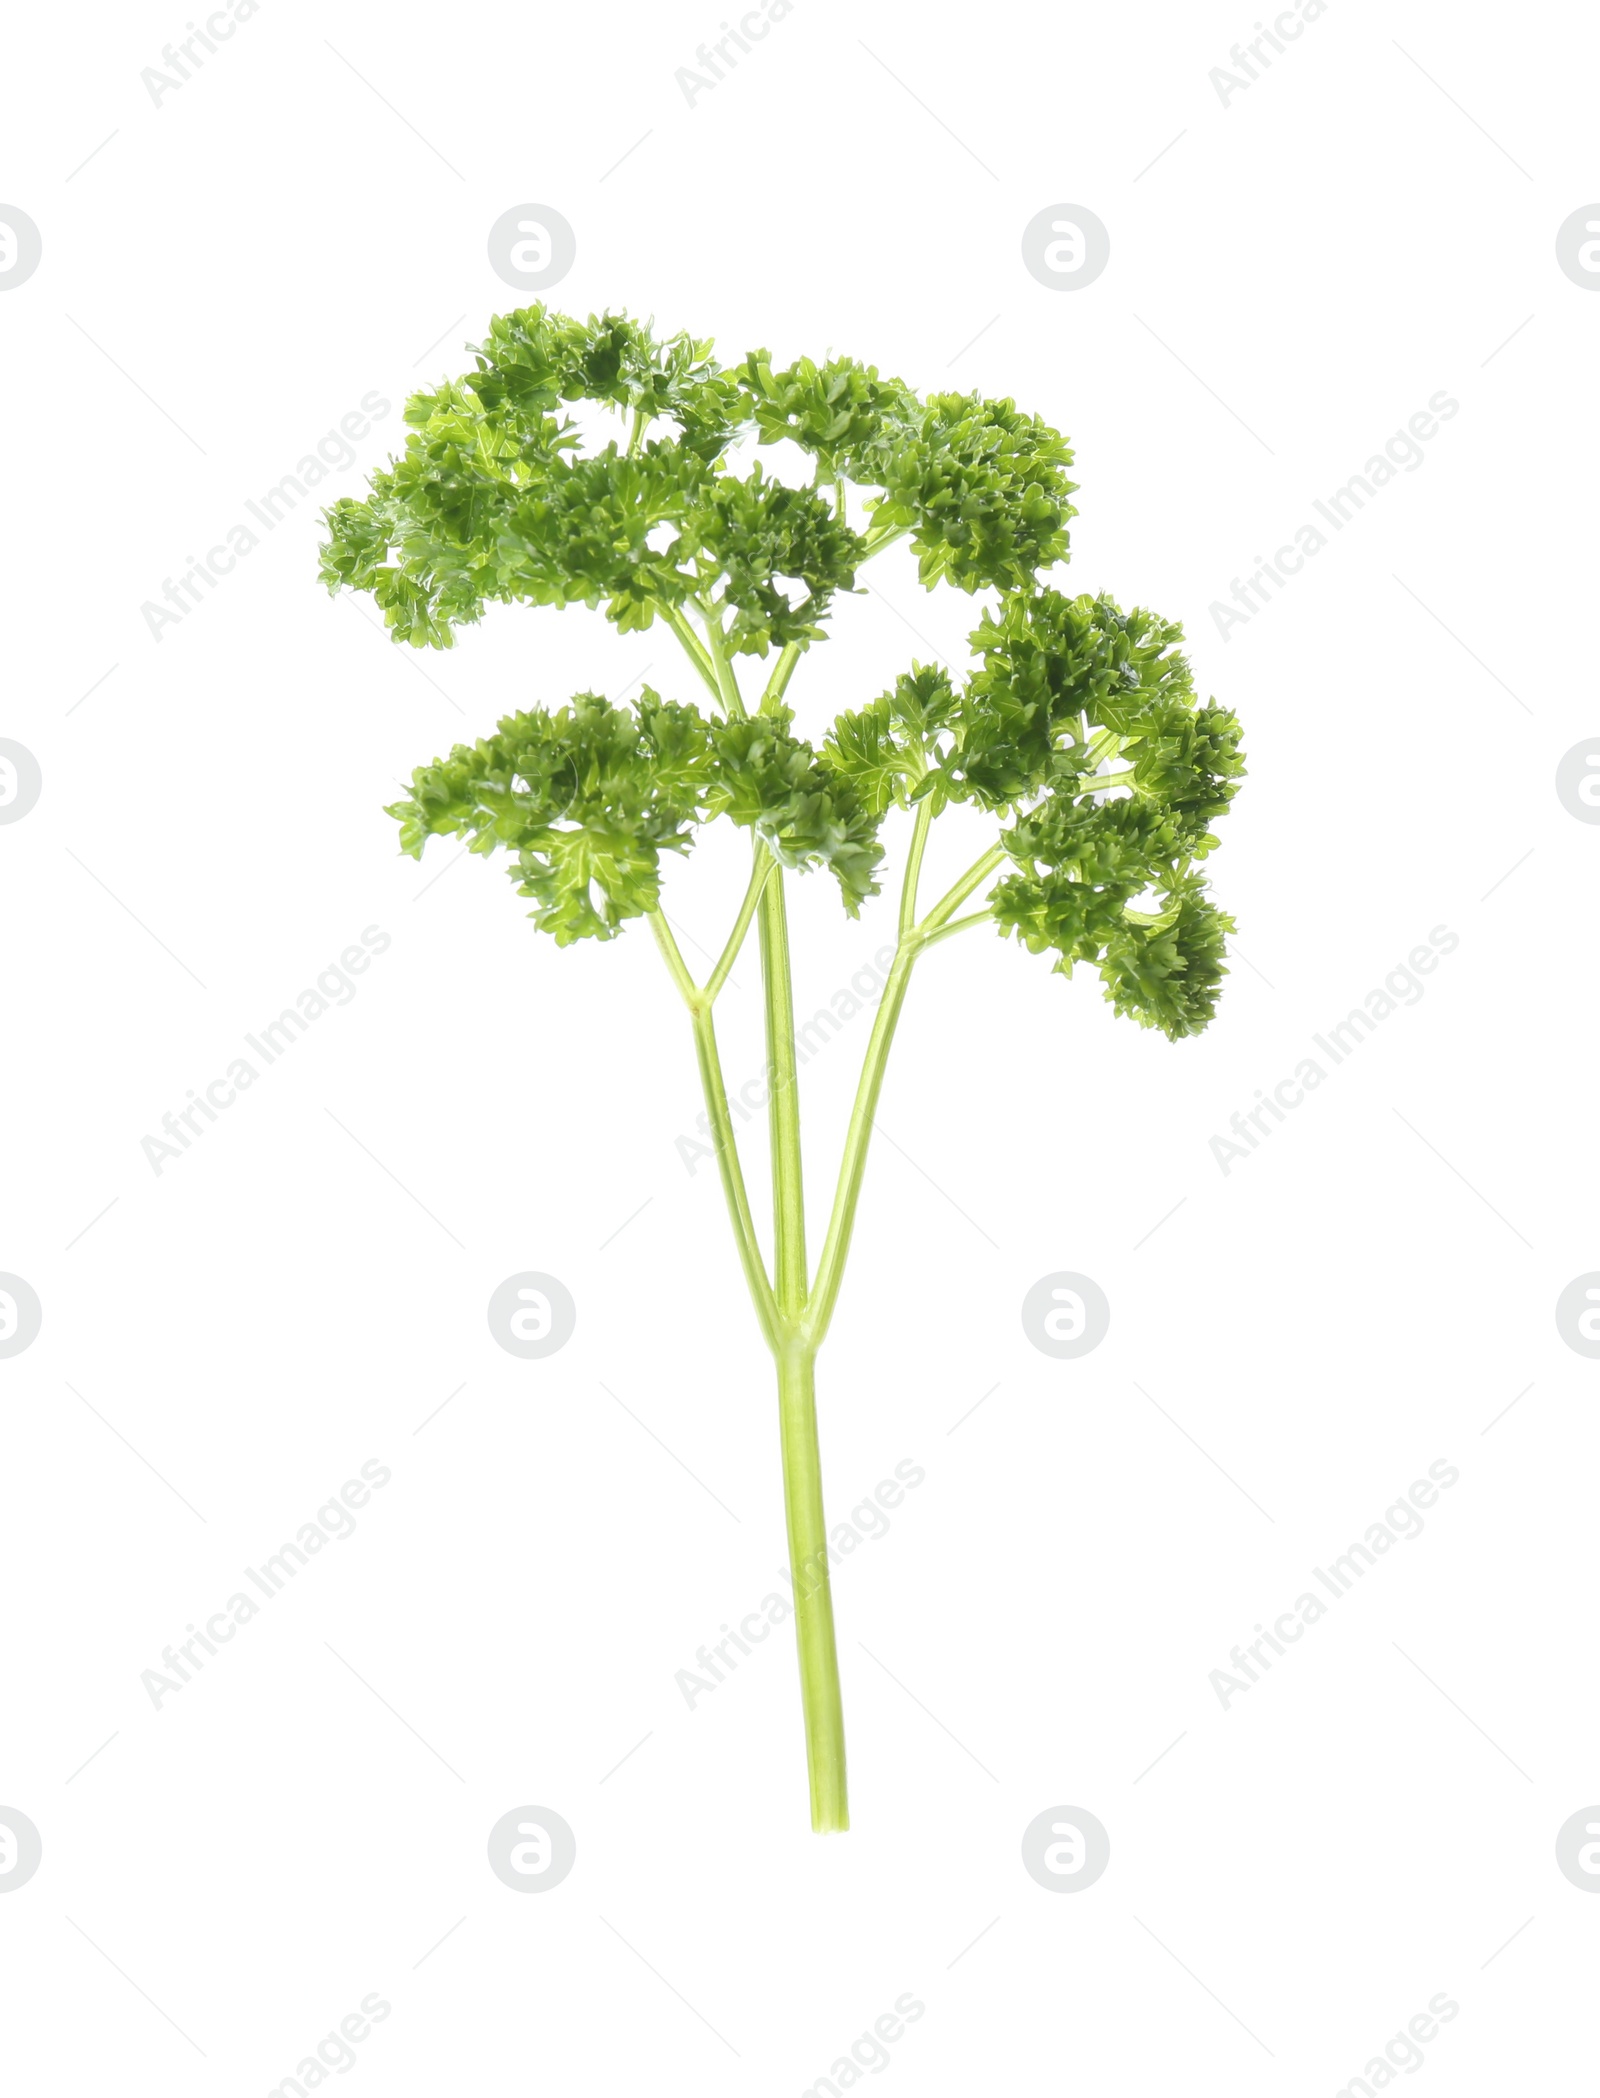 Photo of Fresh green curly parsley on white background